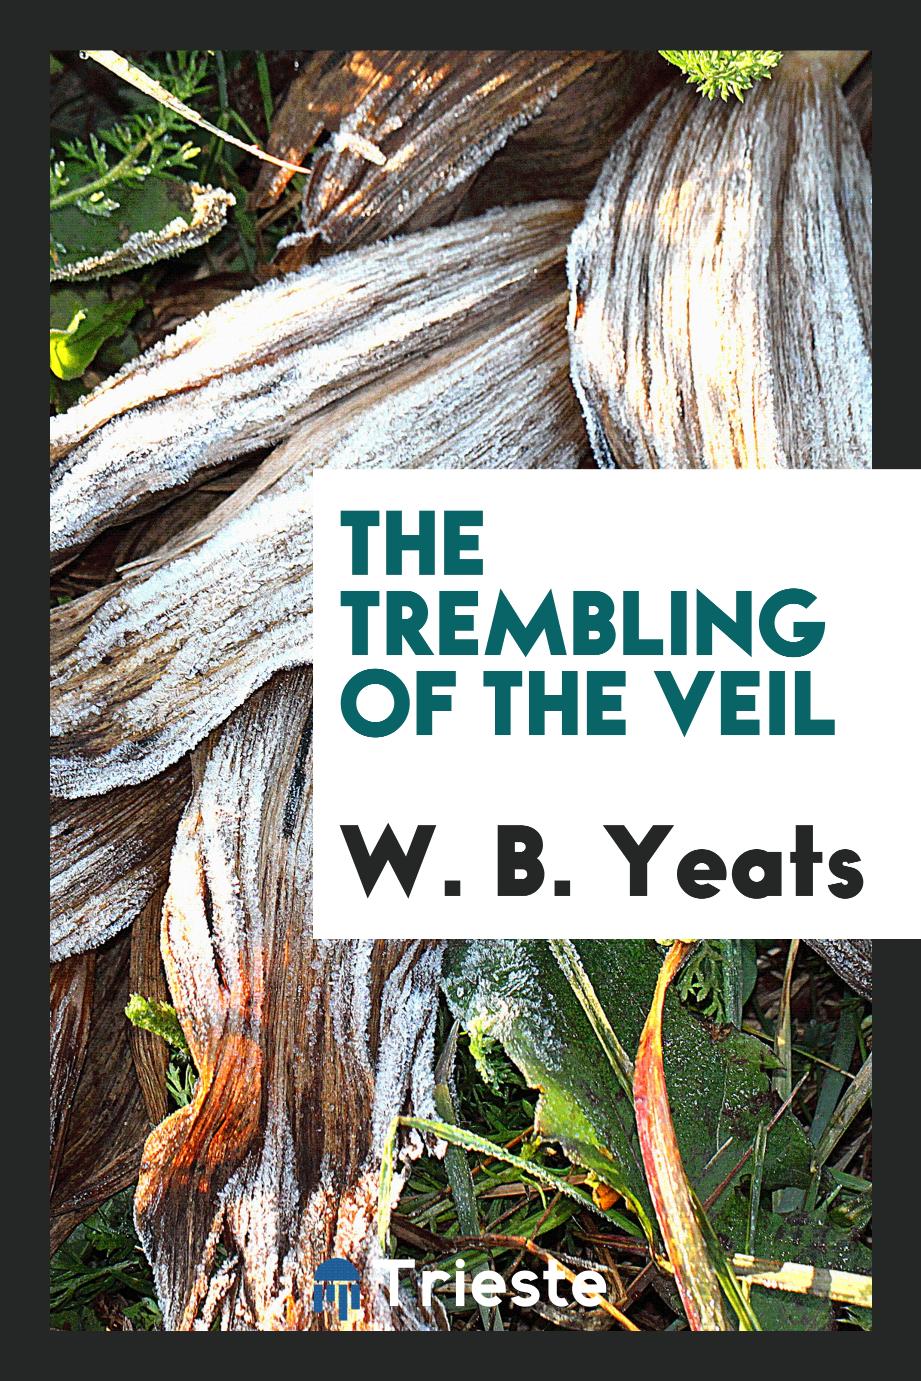 The trembling of the veil